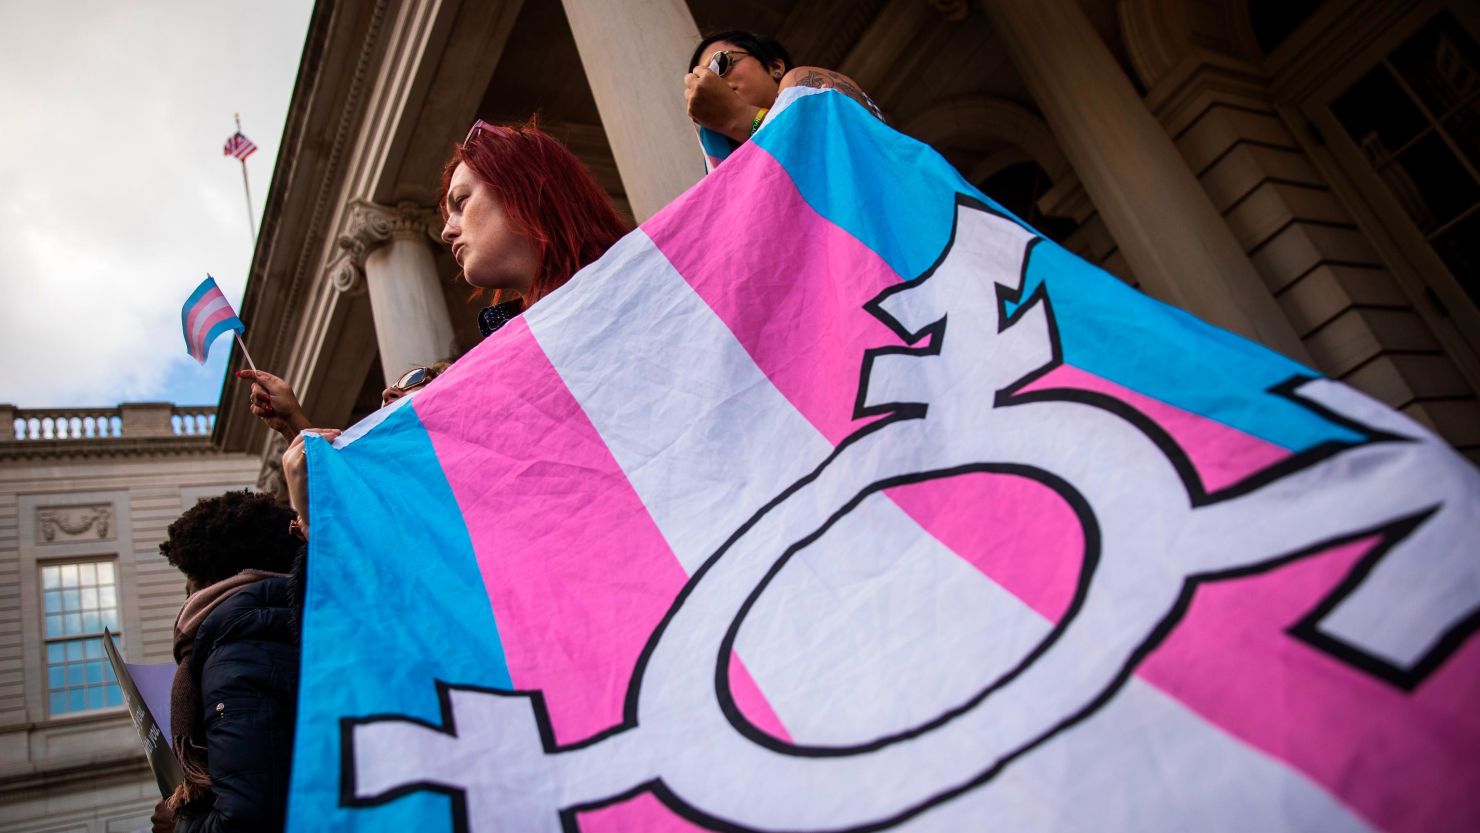 LGBTQ activists and their supporters rally in support of transgender people on the steps of New York City Hall, October 24, 2018 in New York City. The group gathered to speak out against the Trump administration's stance toward transgender people. 